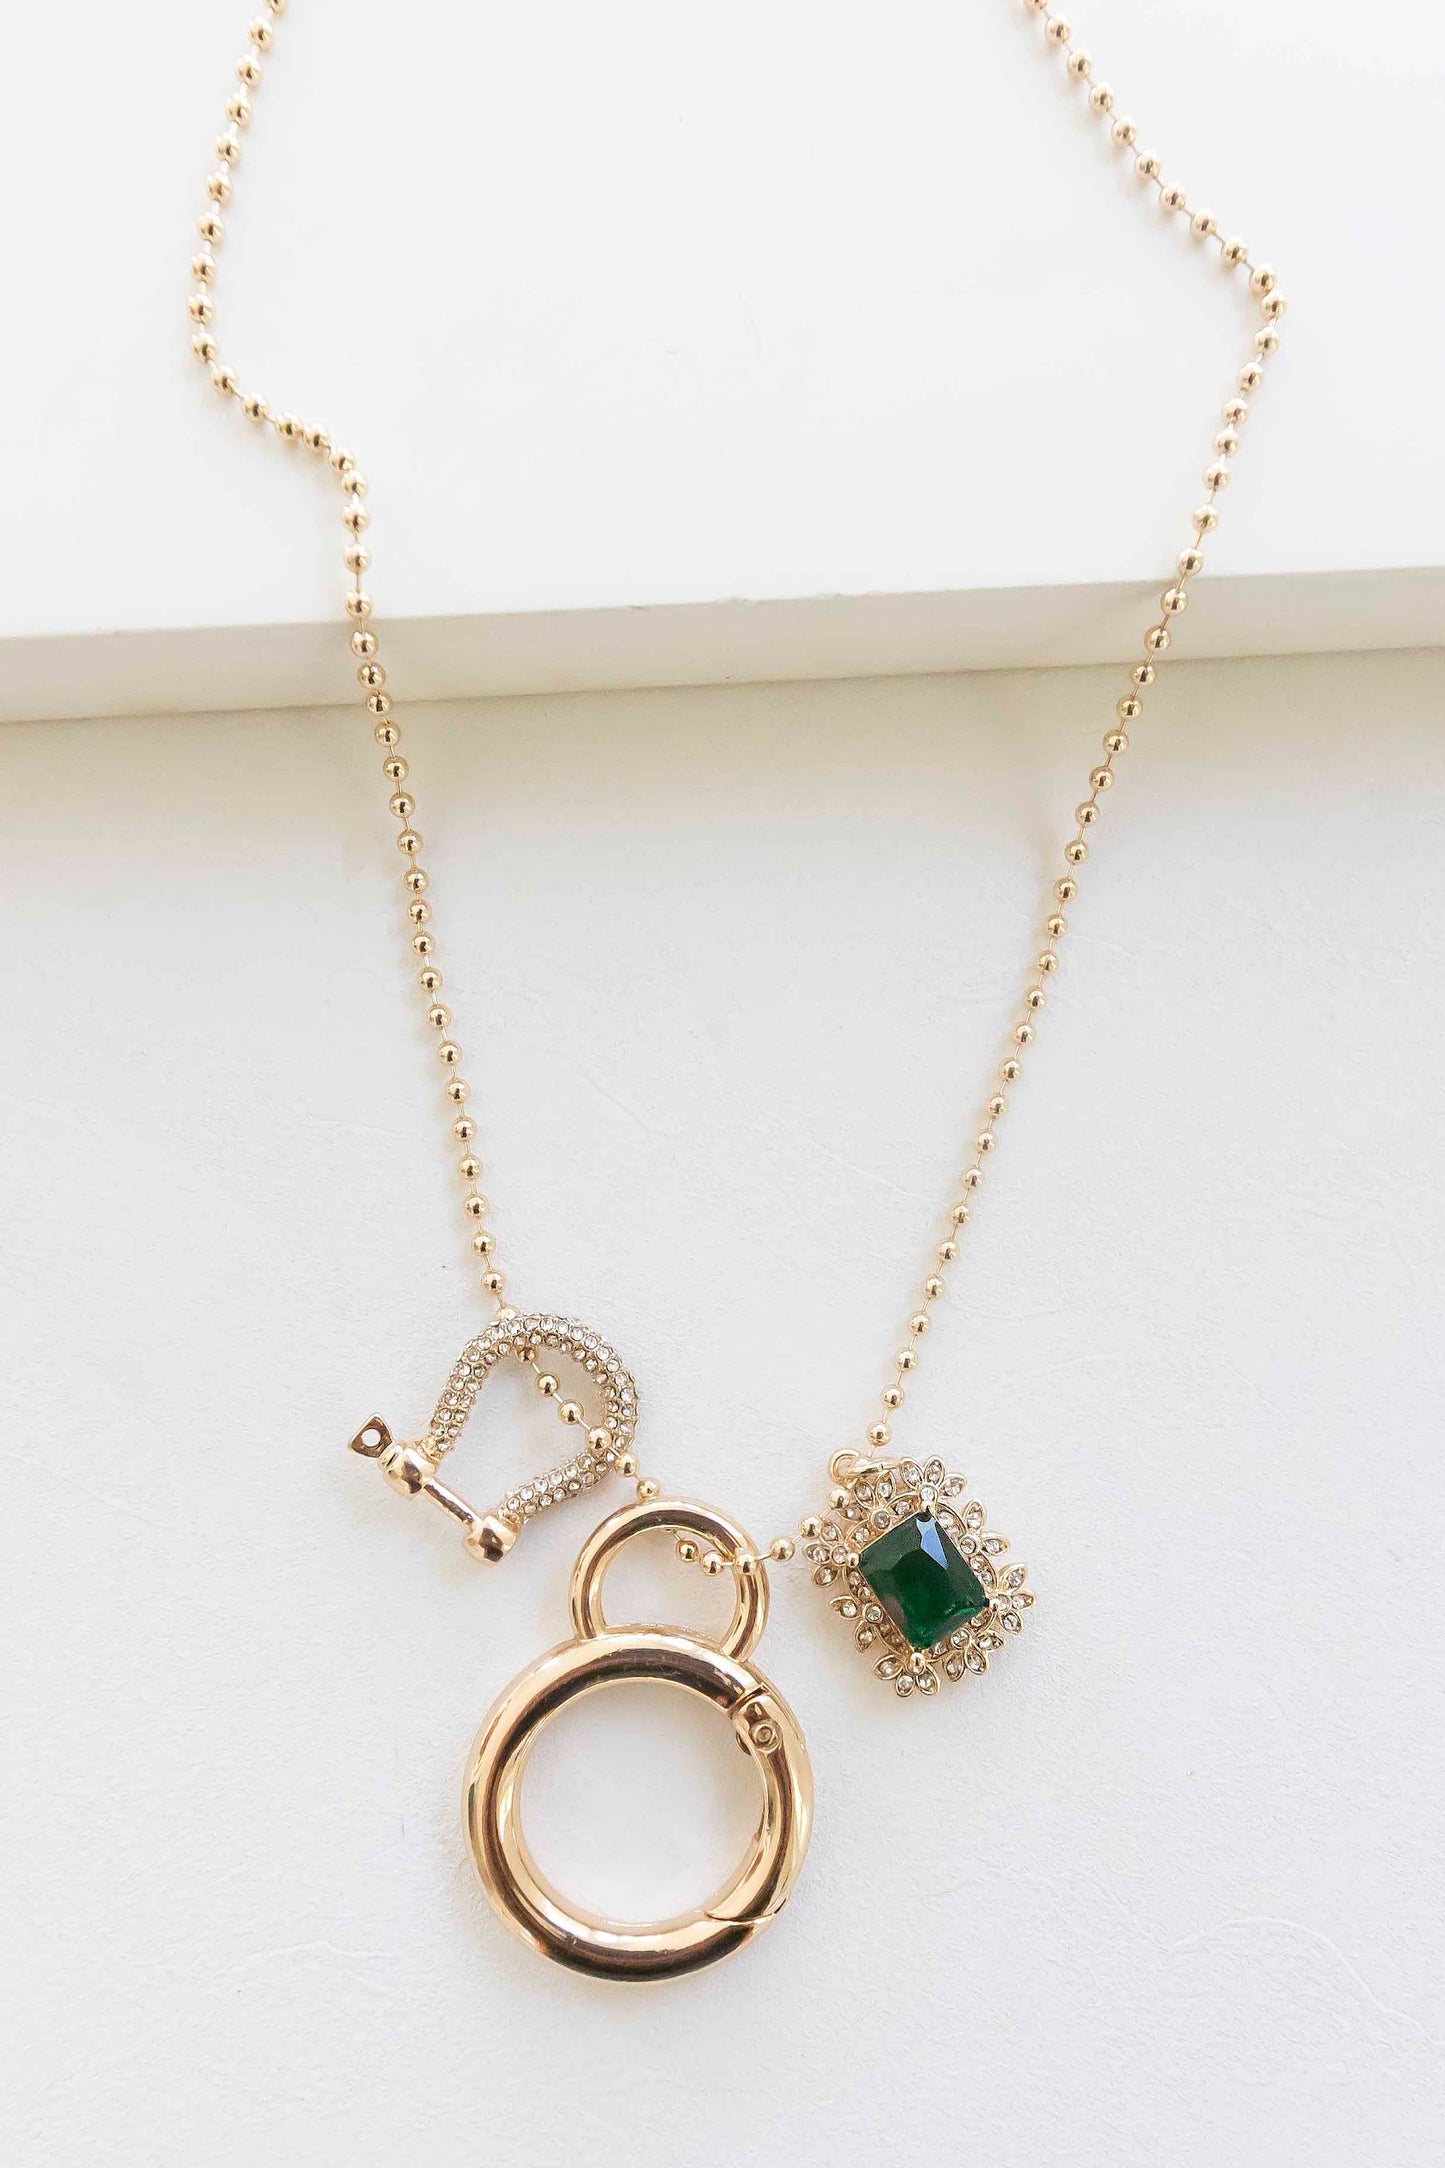 Eve Long Emerald Pendant Necklace | Long Gold Chain with Gold Horseshoe and Emerald Crystal Pendant Charms